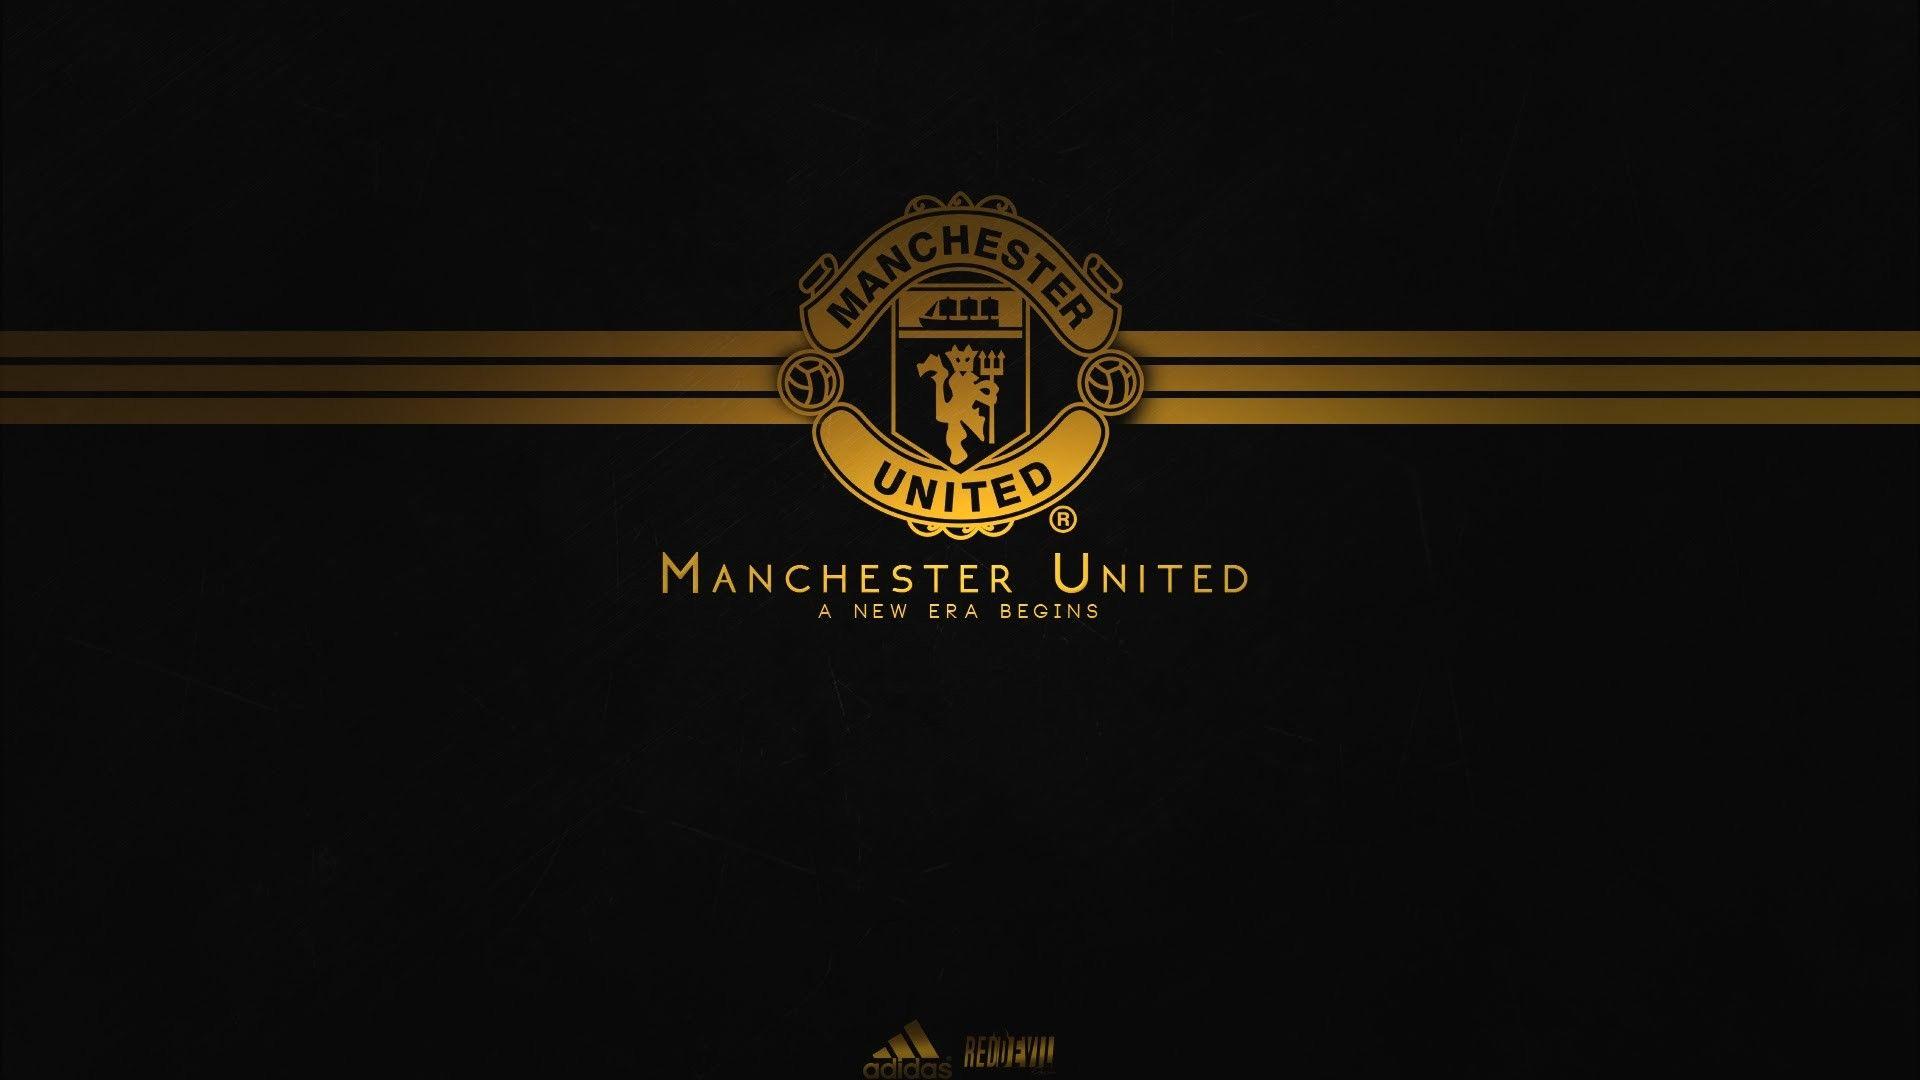 Manchester United Hd Wallpapers 1080p Wallpaper Cave